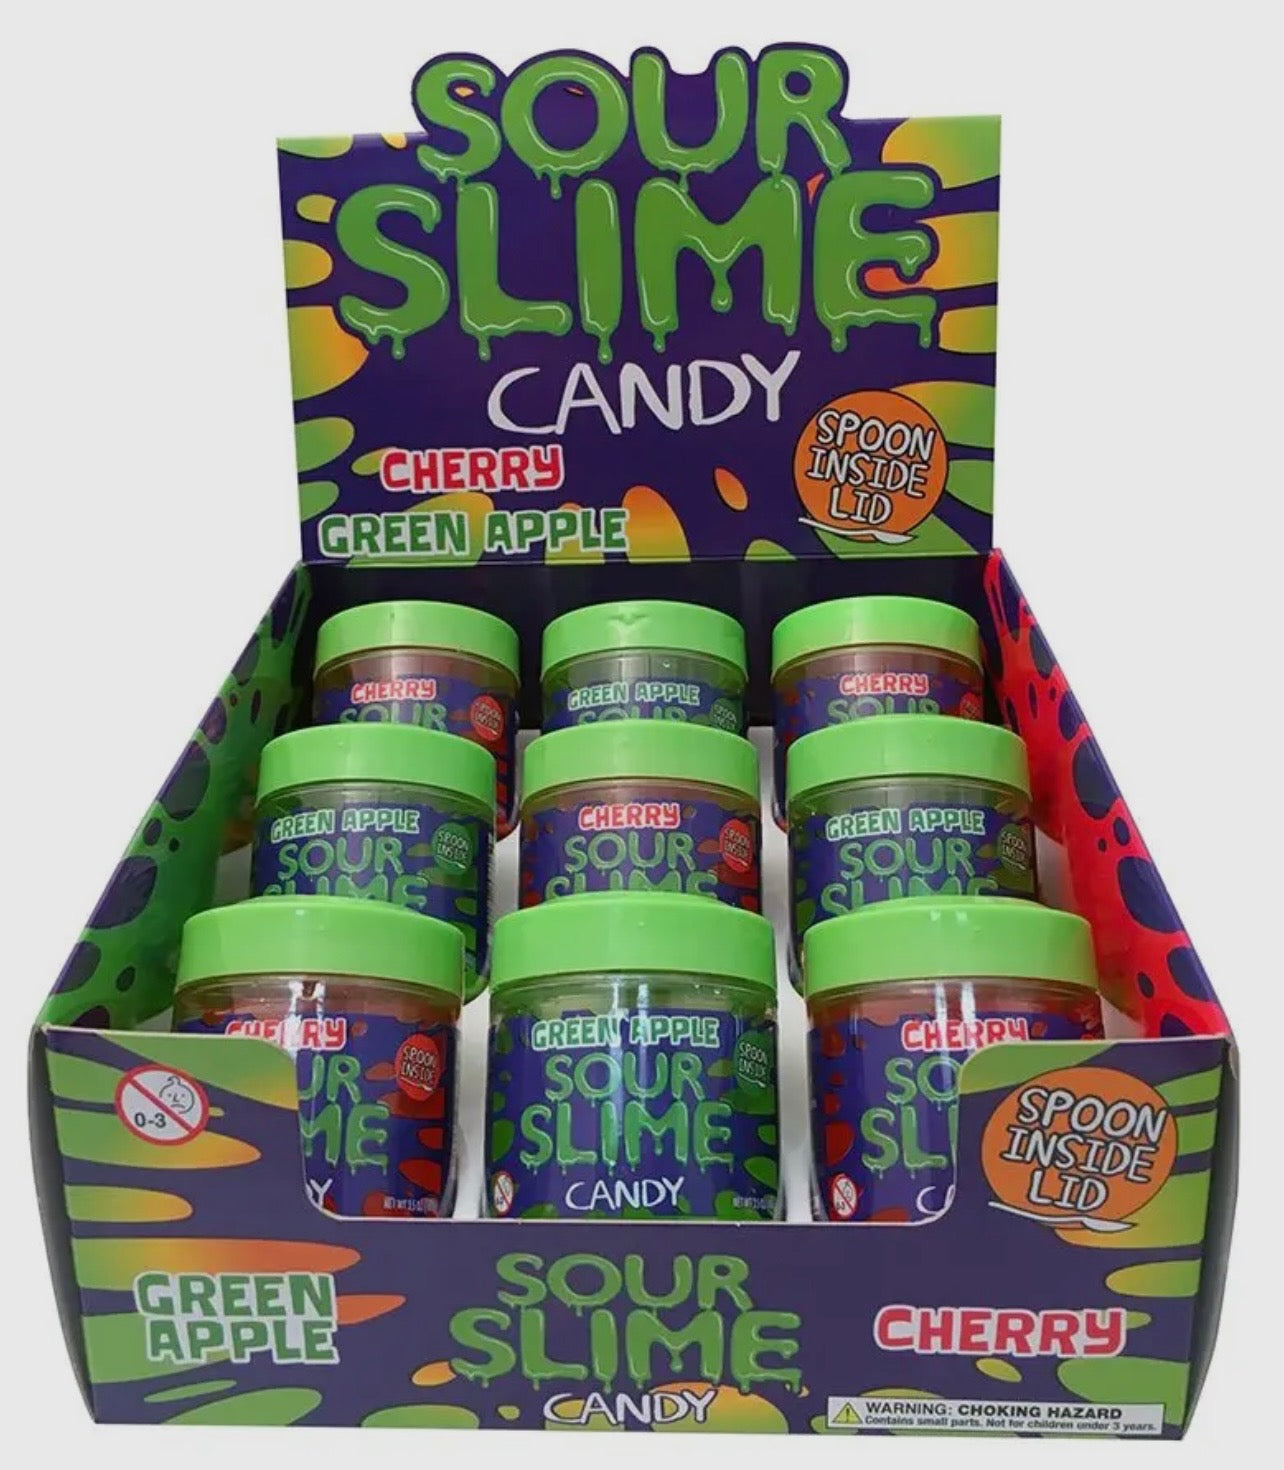 Sour slime candy